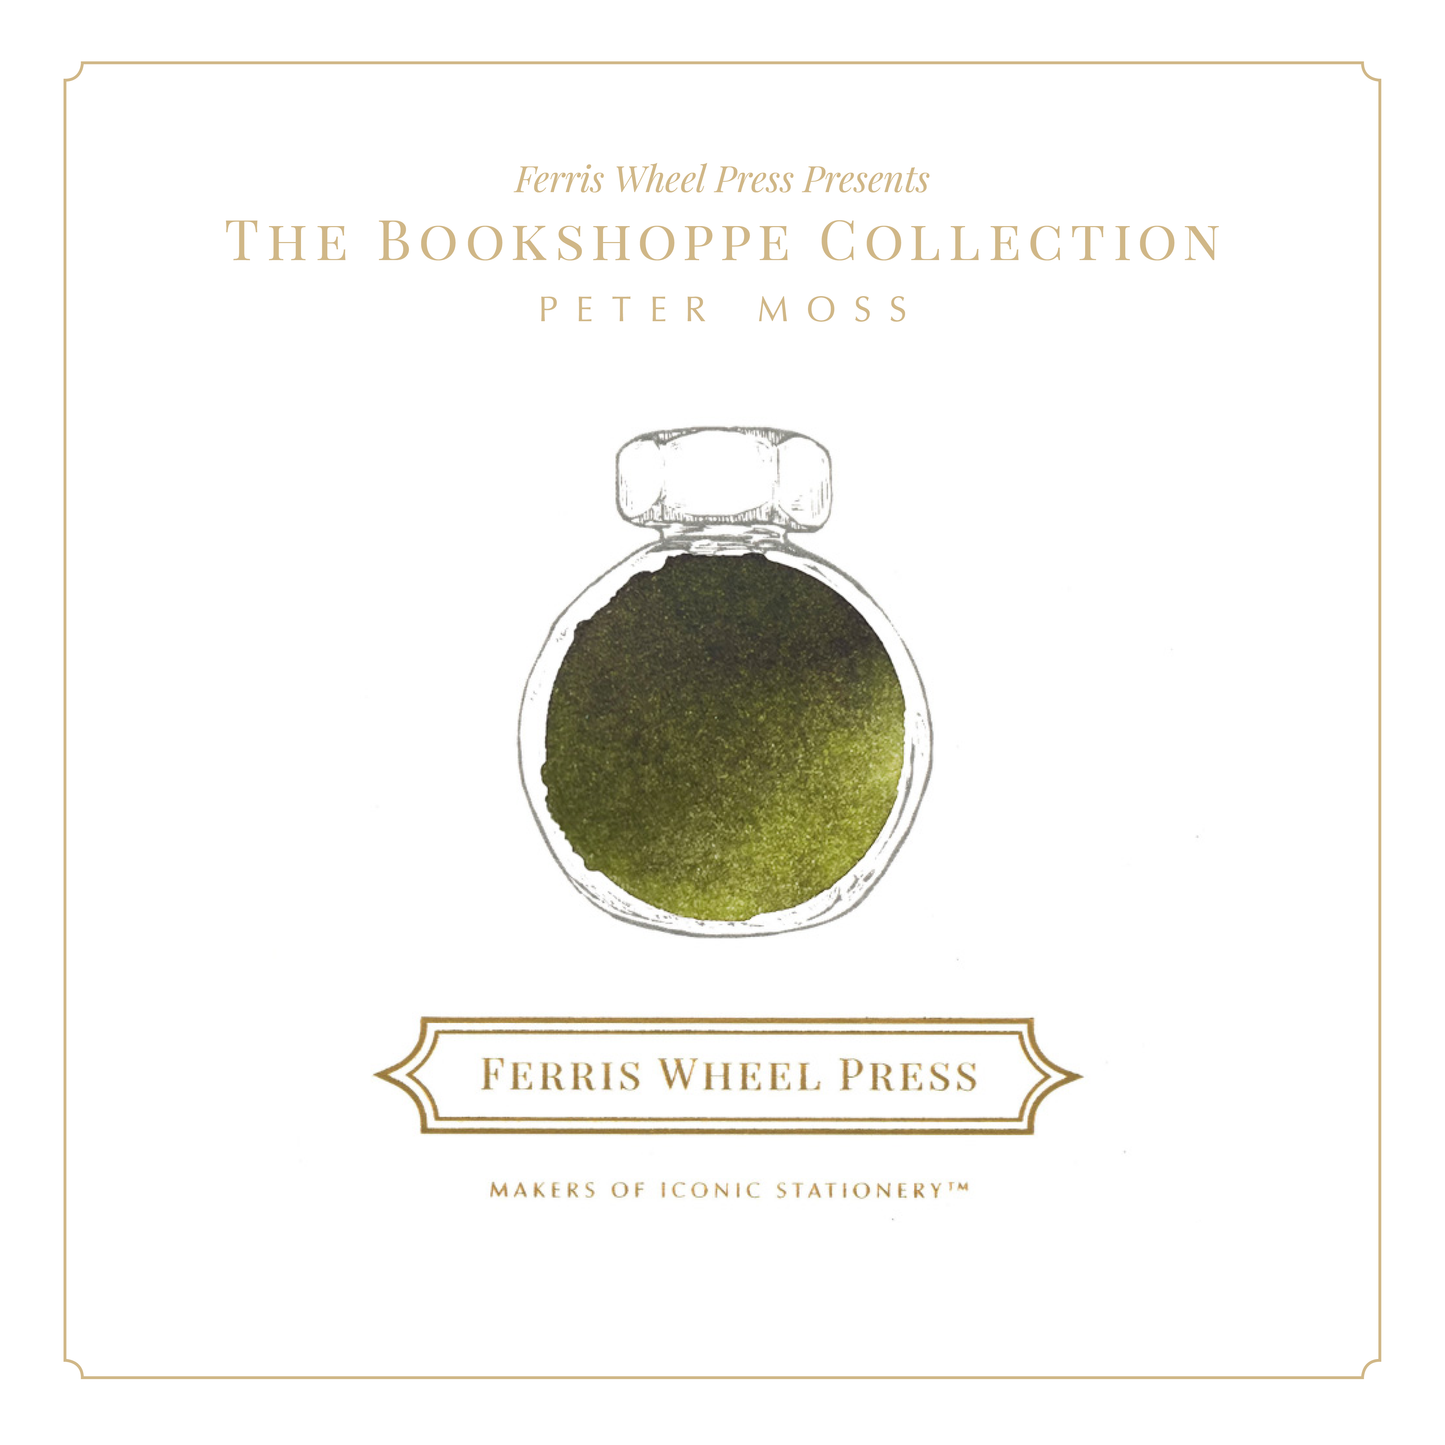 Ferris Wheel Press - The Bookshoppe Collection - Ink Charger Set